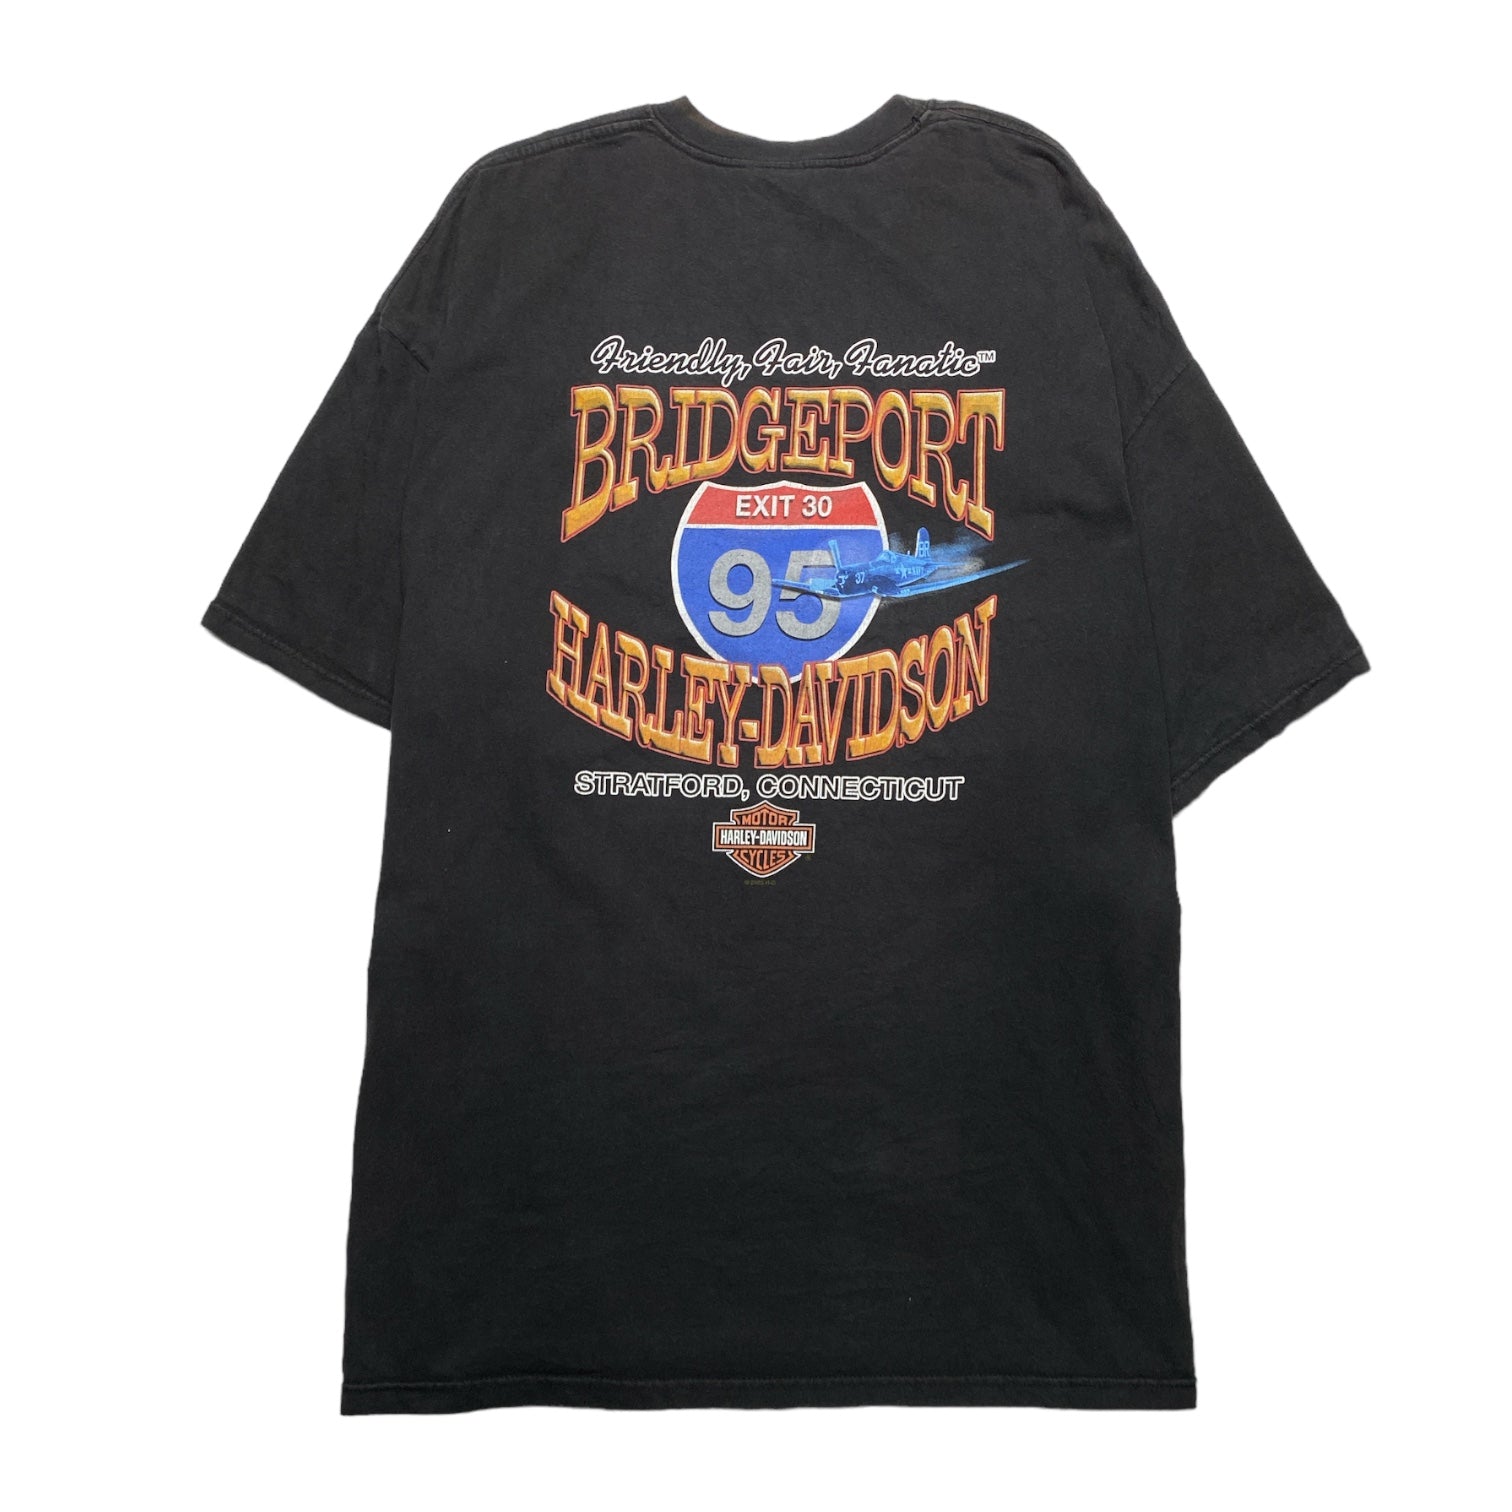 MOTOR HARLEY-DAVIDSON CYCLES Life begins when you get one Tee